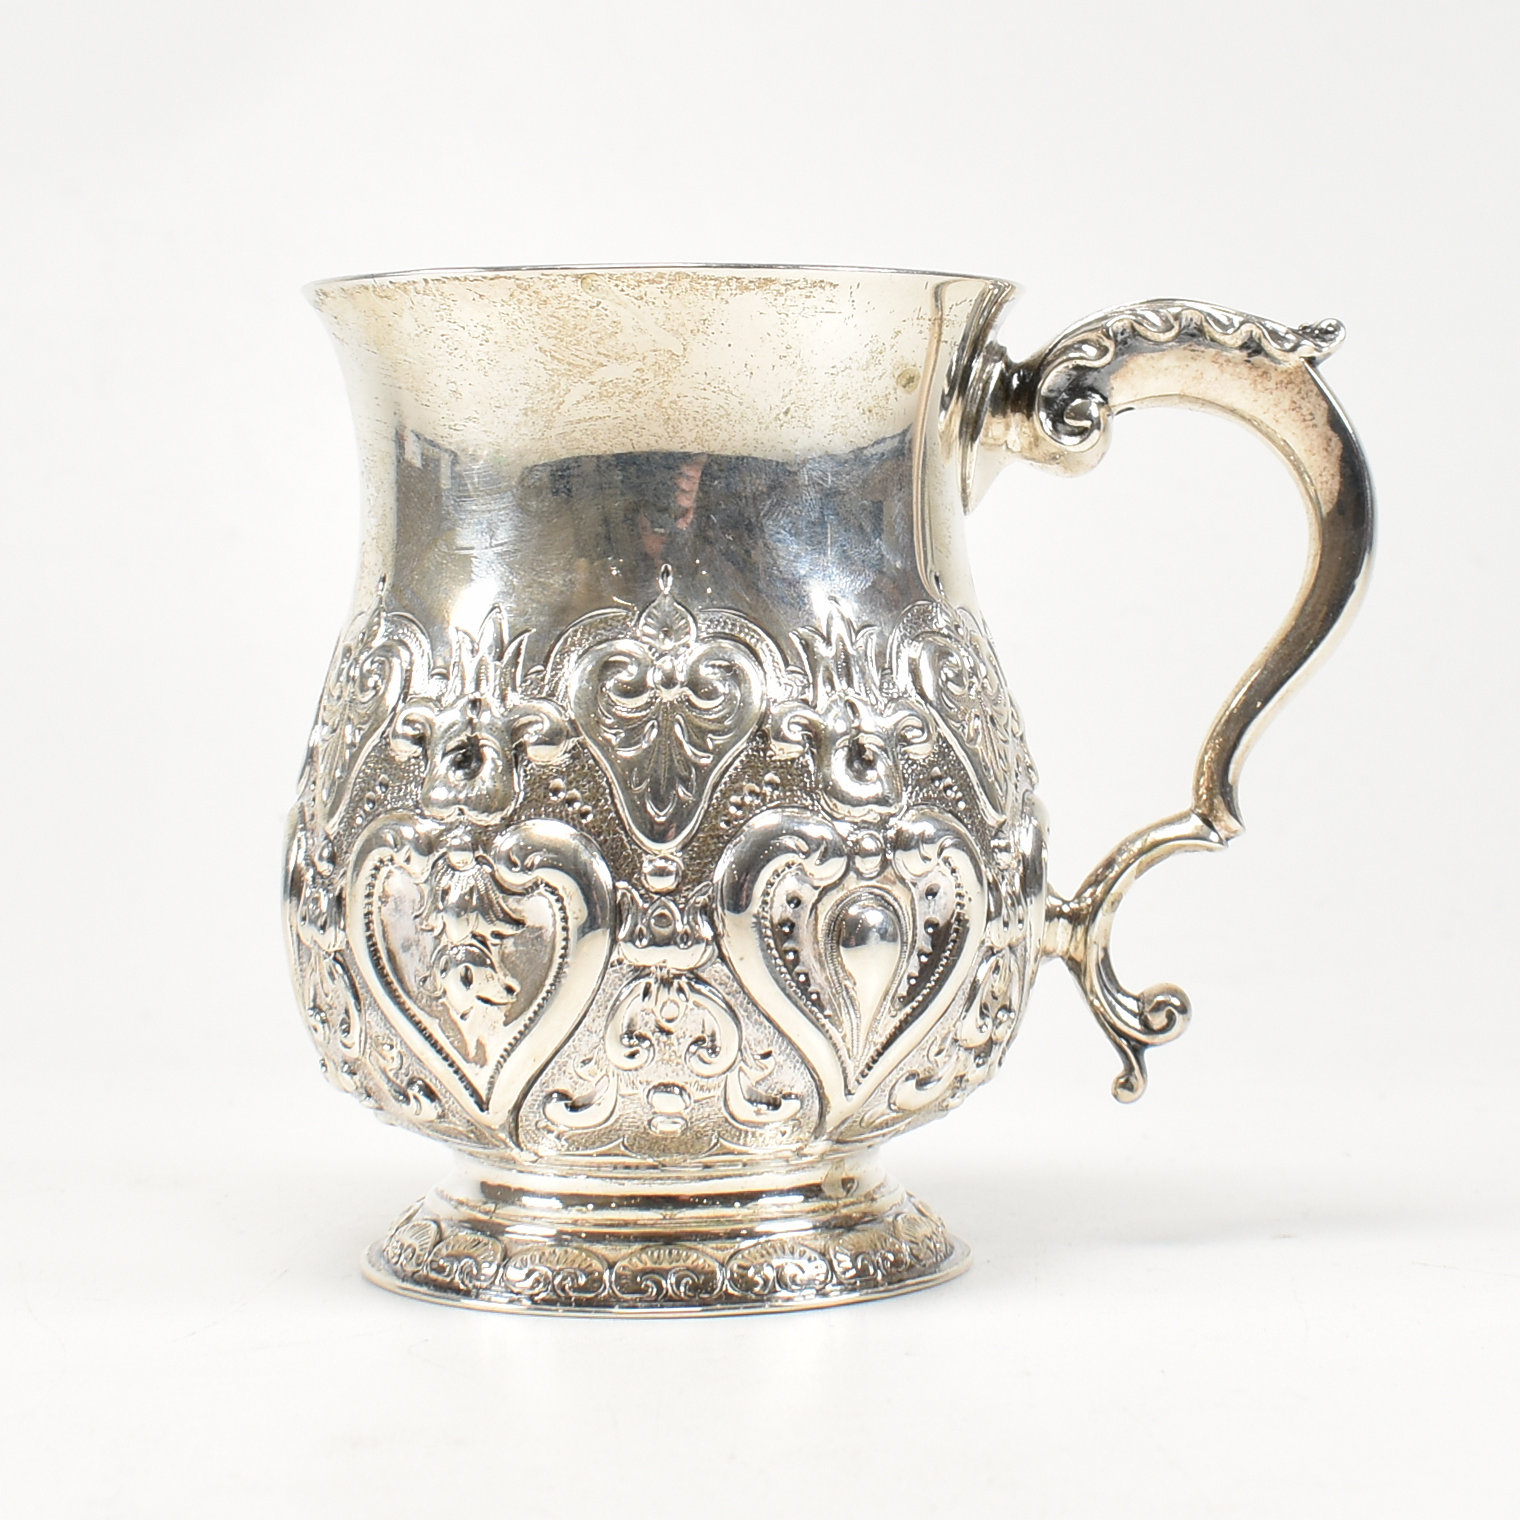 VICTORIAN HALLMARKED SILVER CHRISTENING CUP - Image 9 of 9